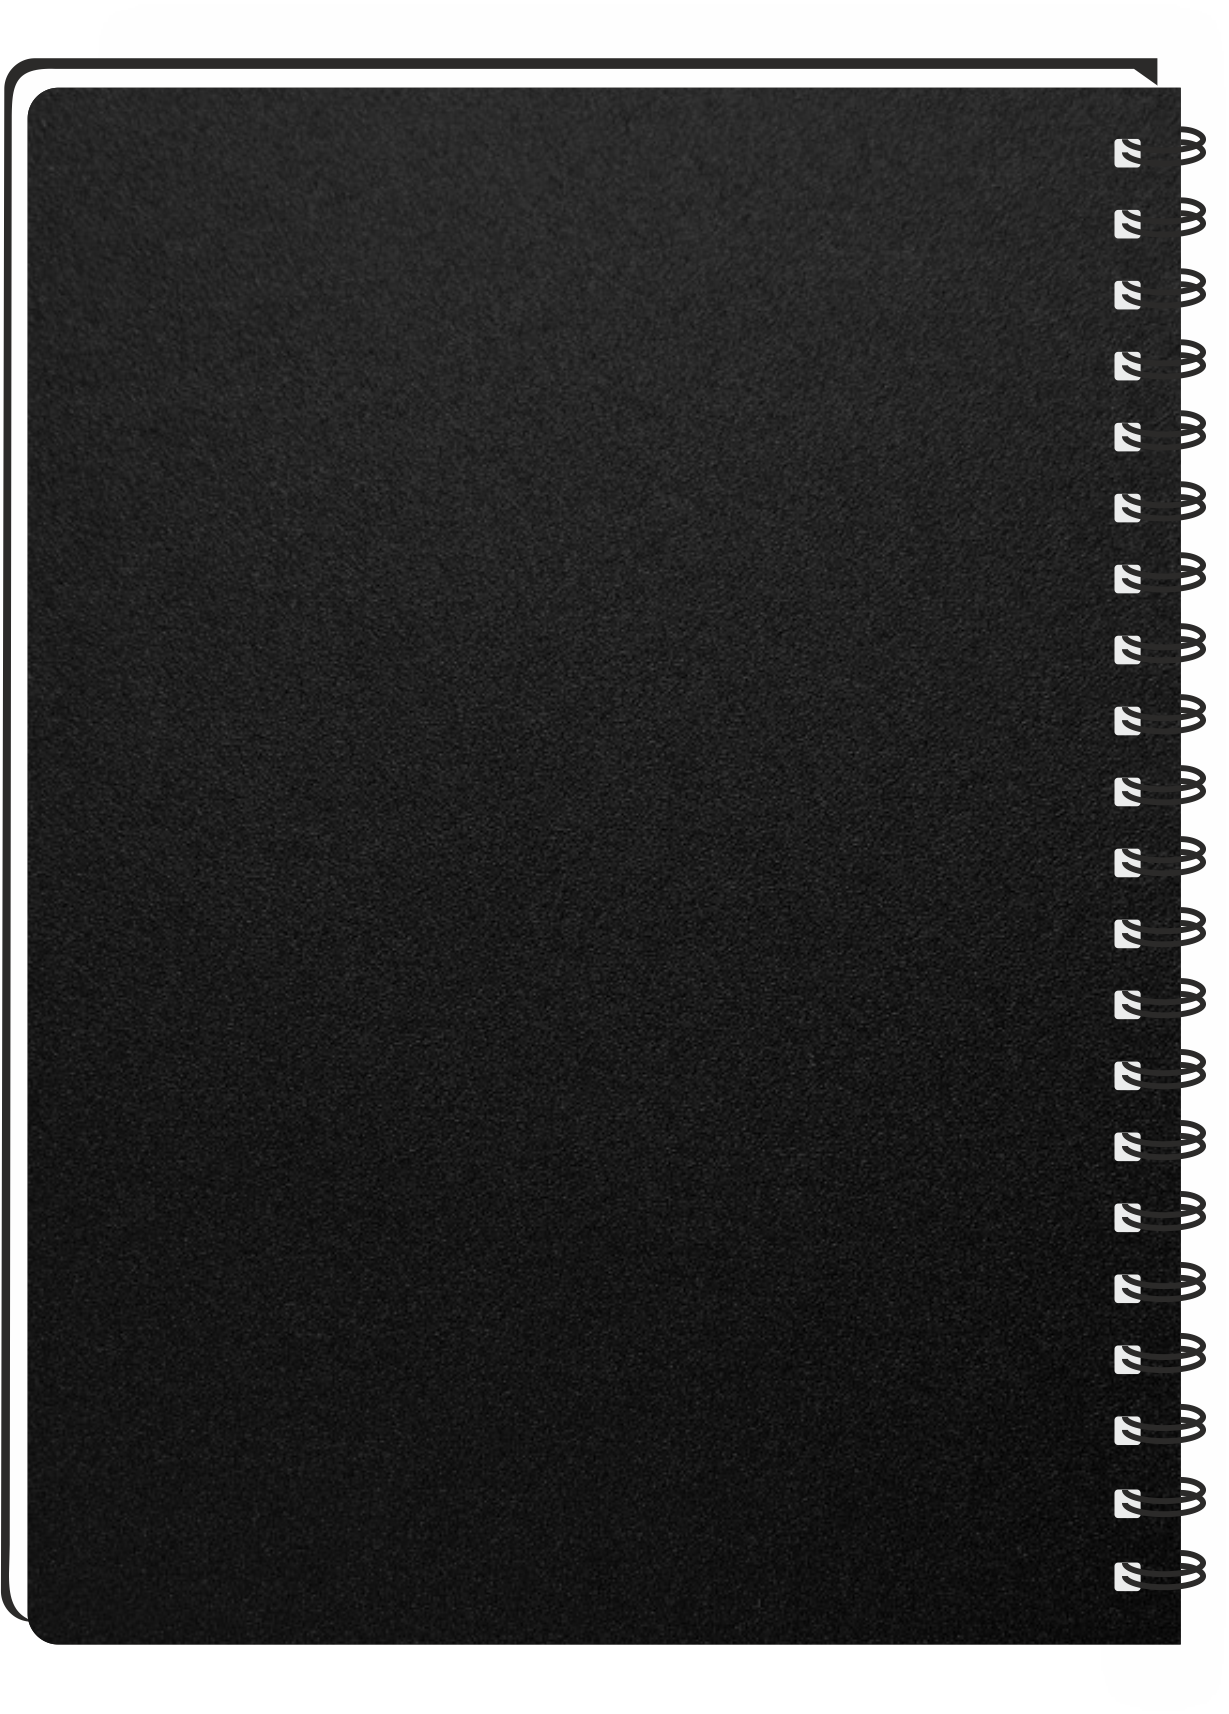 Sundaram A/6 Notebook (PVC Wiro) - 160 Pages (PW-2) Wholesale Pack- 144 Units